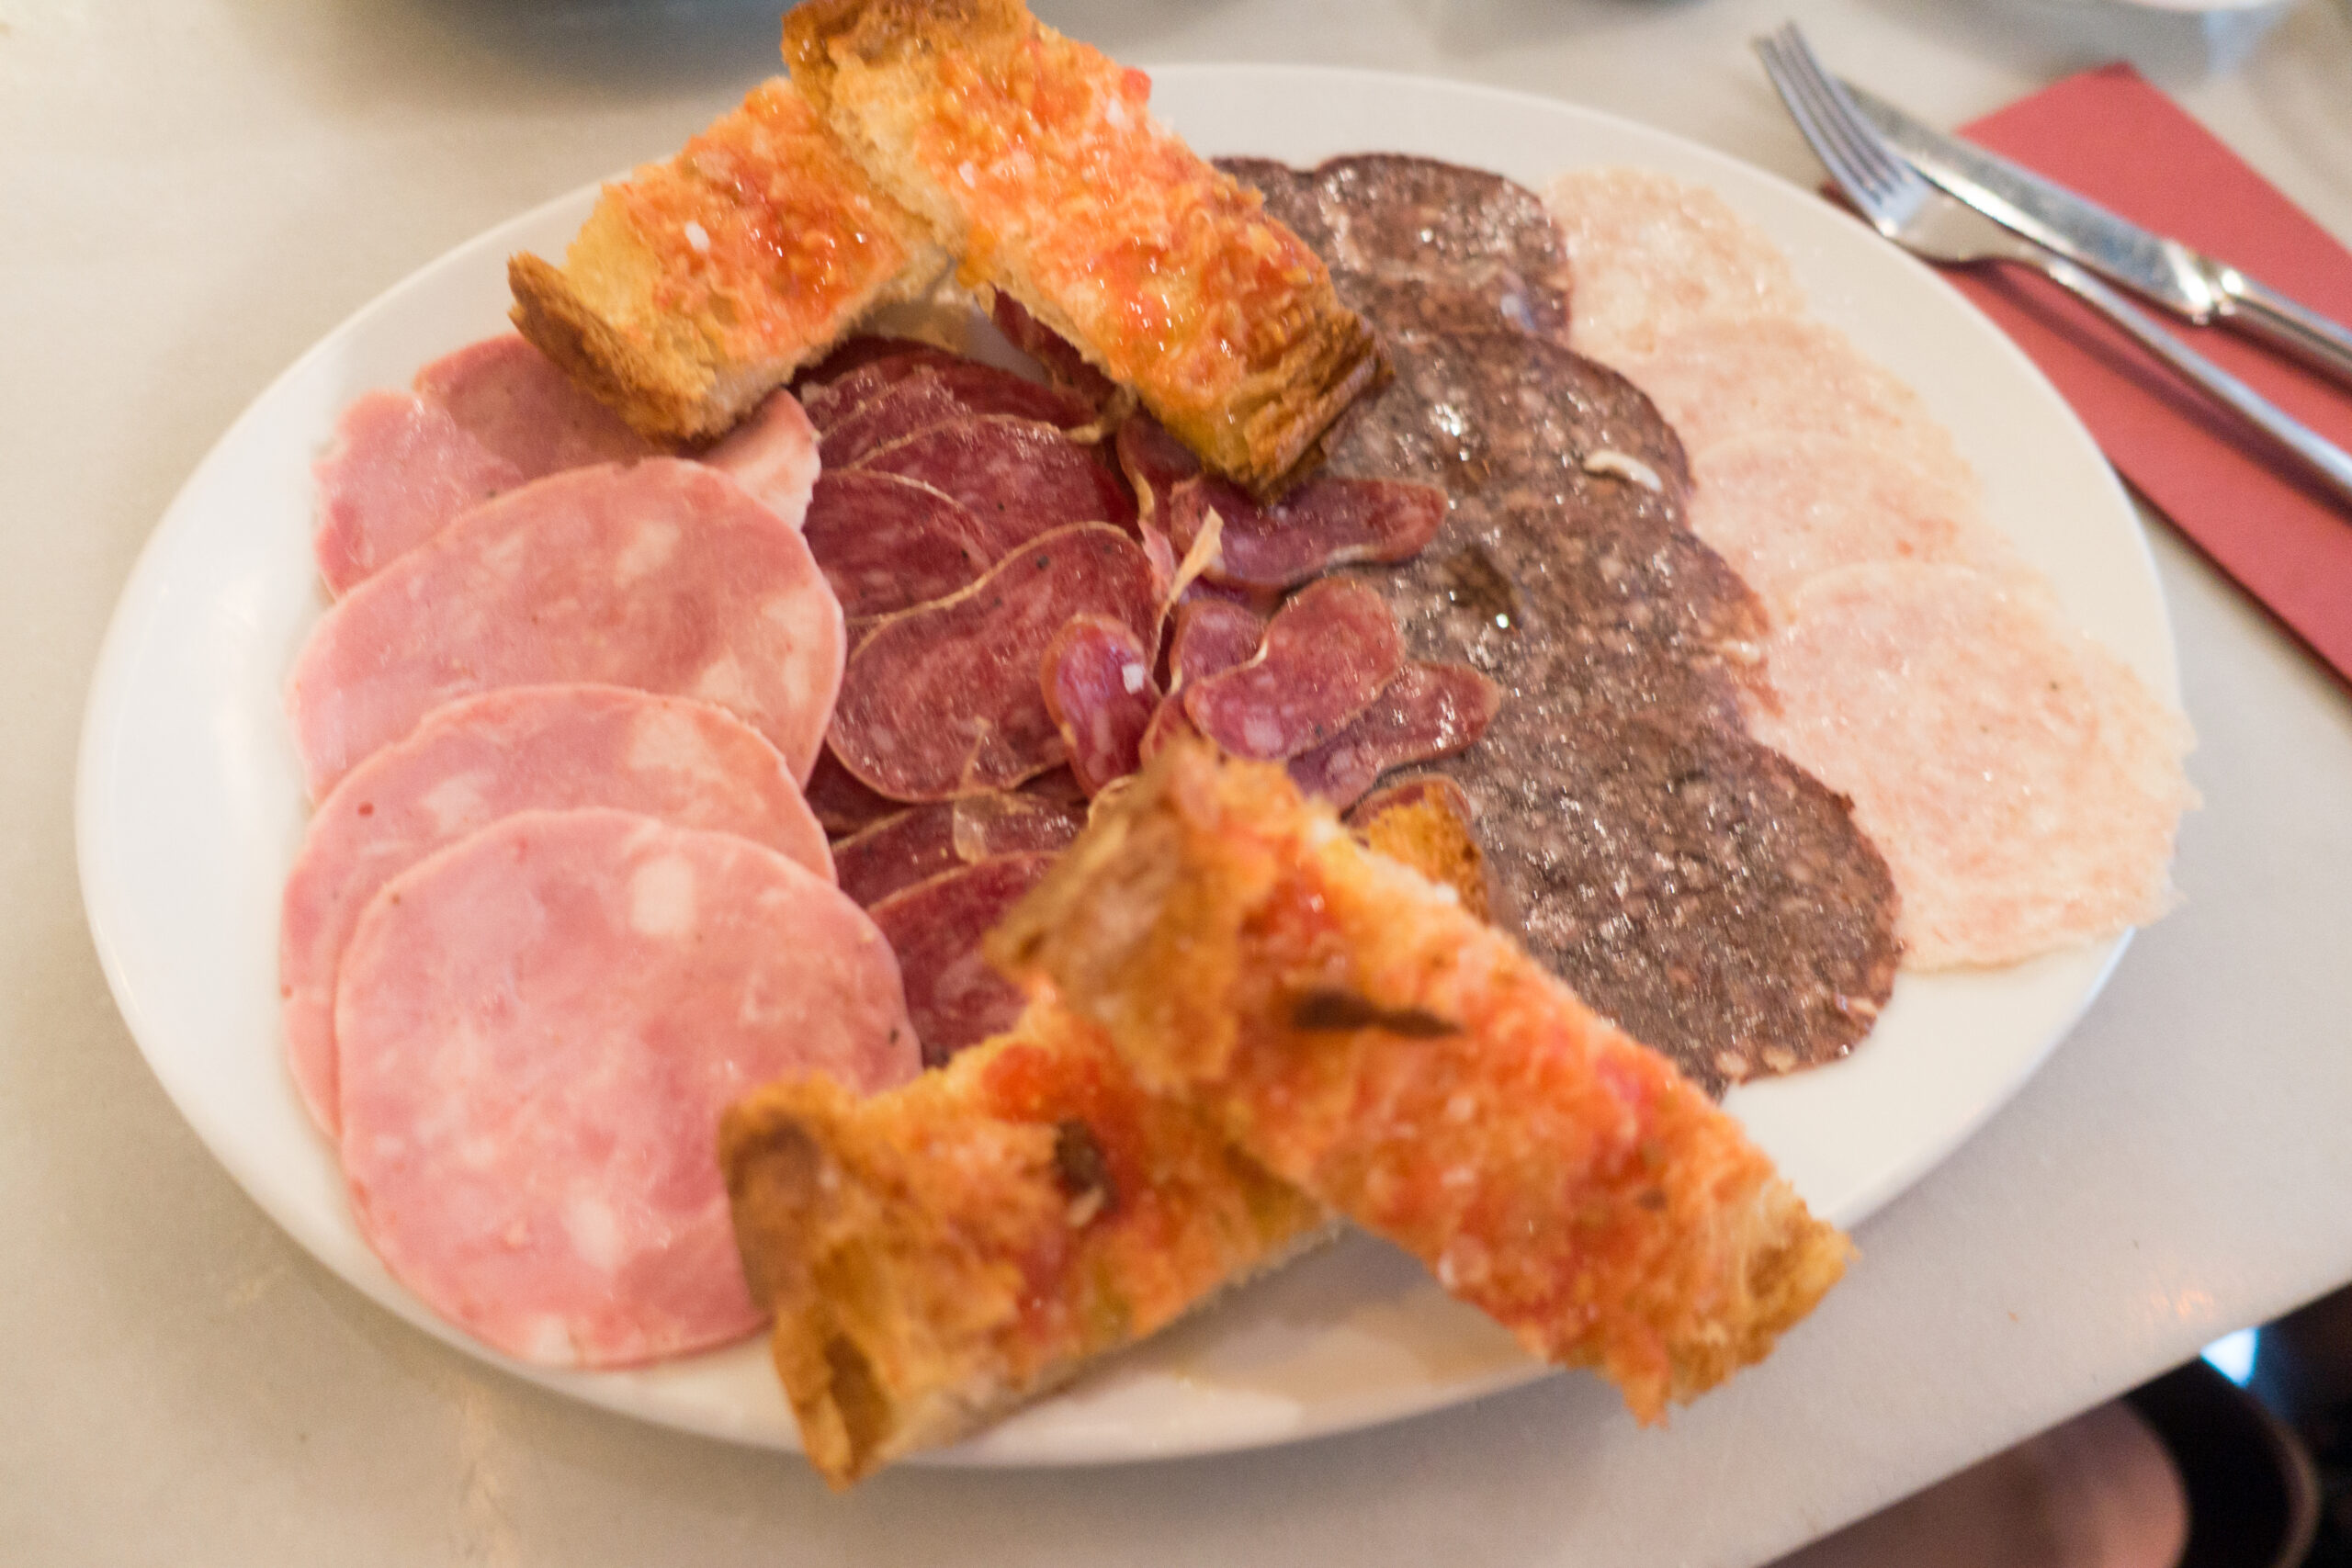 Cured meats and tomato toast